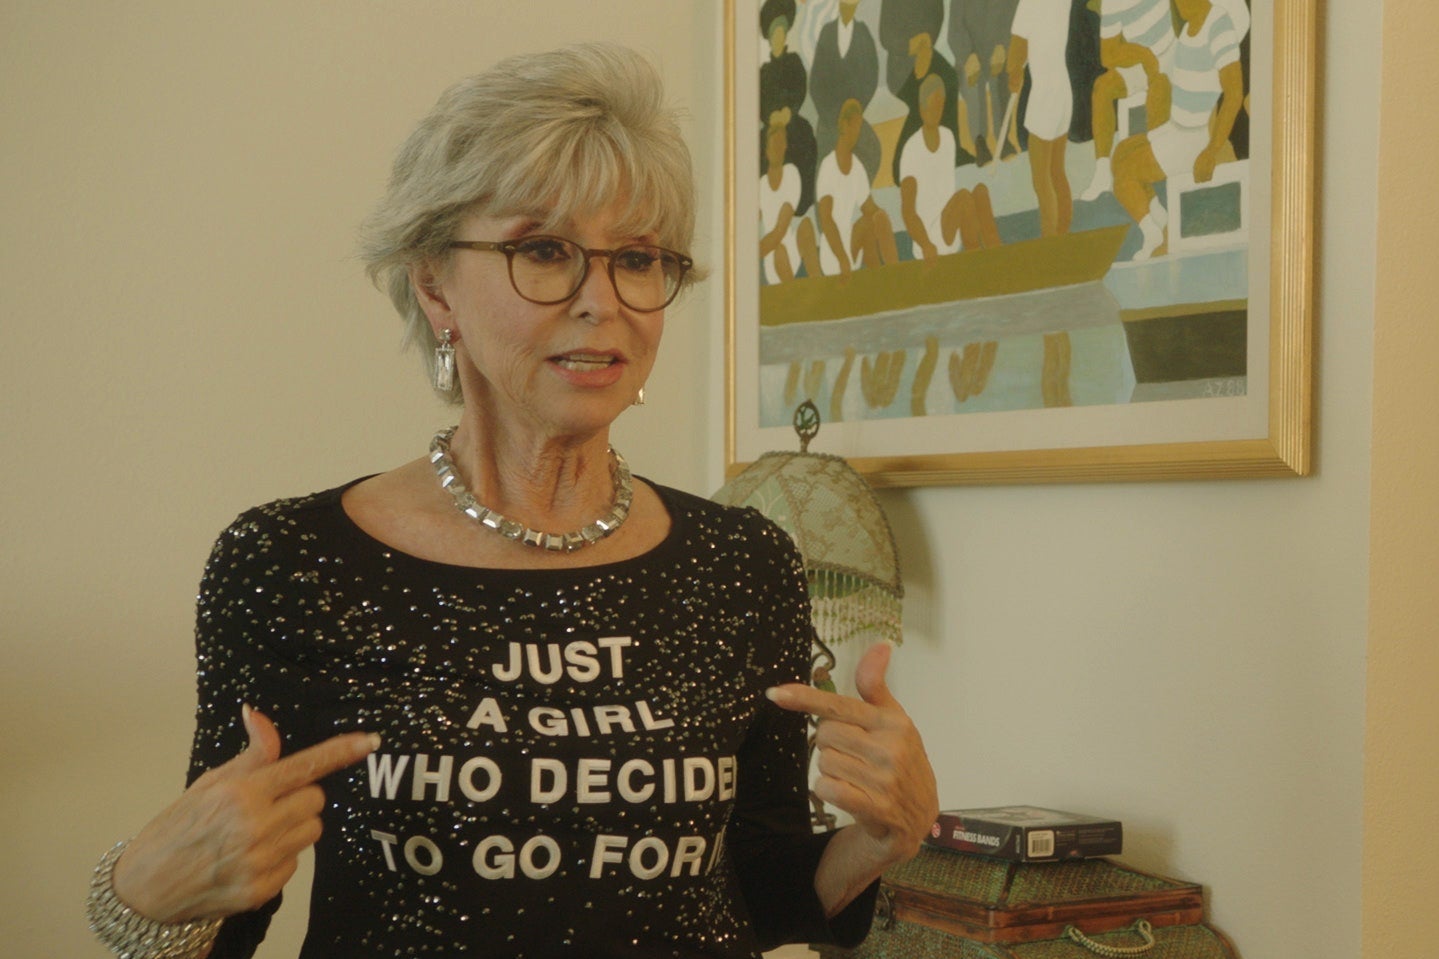 Rita Moreno, with gray hair and glasses, points her black, bedazzled shirt. Text on the shirt reads: "Just A Girl Who Decided to Go For It"